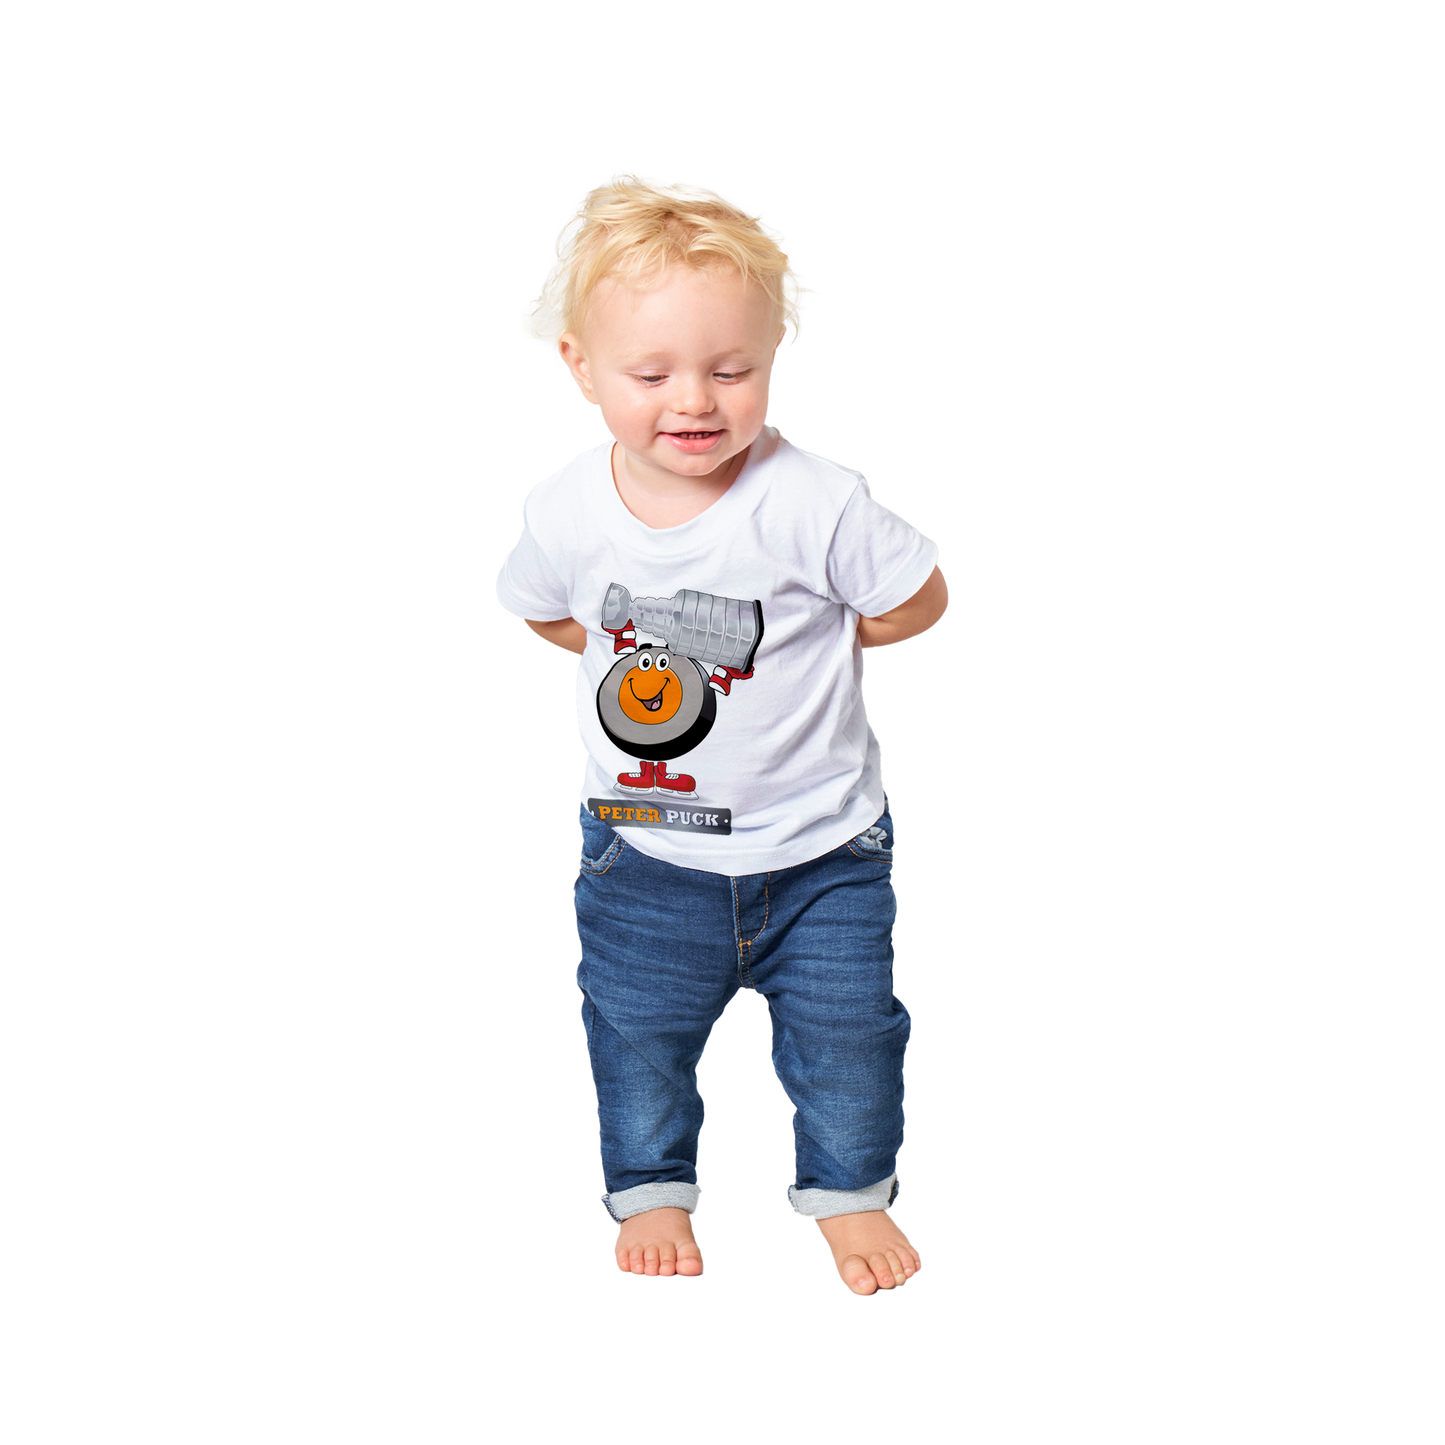 Peter Puck Stanley Cup Classic Baby Crewneck T-shirt